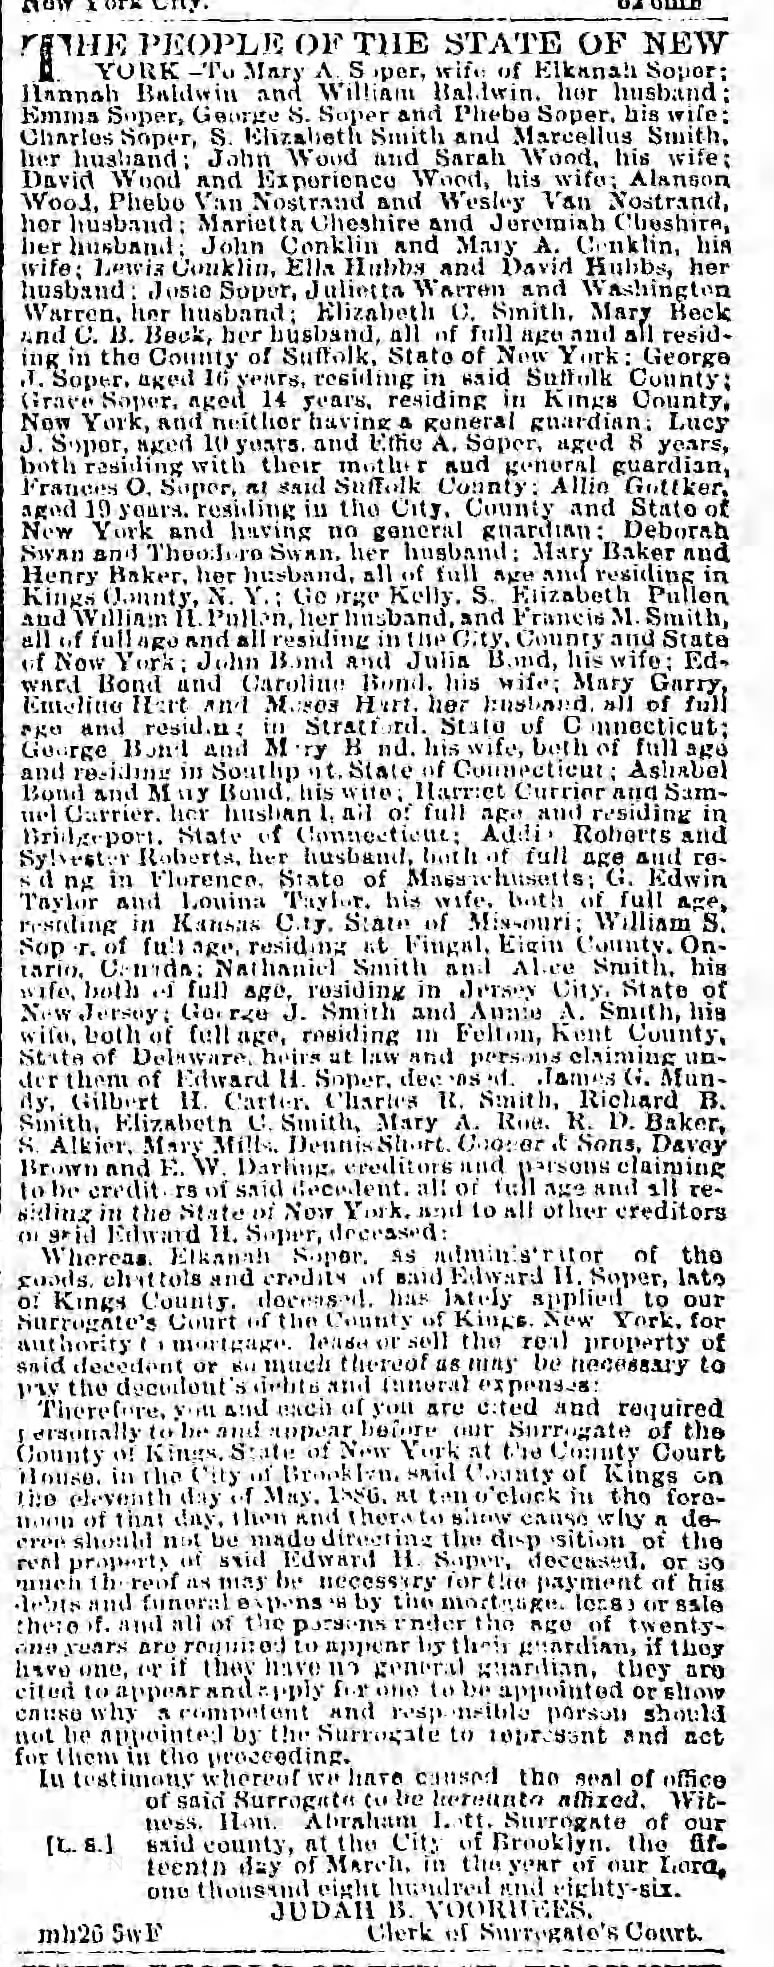 Legal notice 1886, Henry and Mary Baker